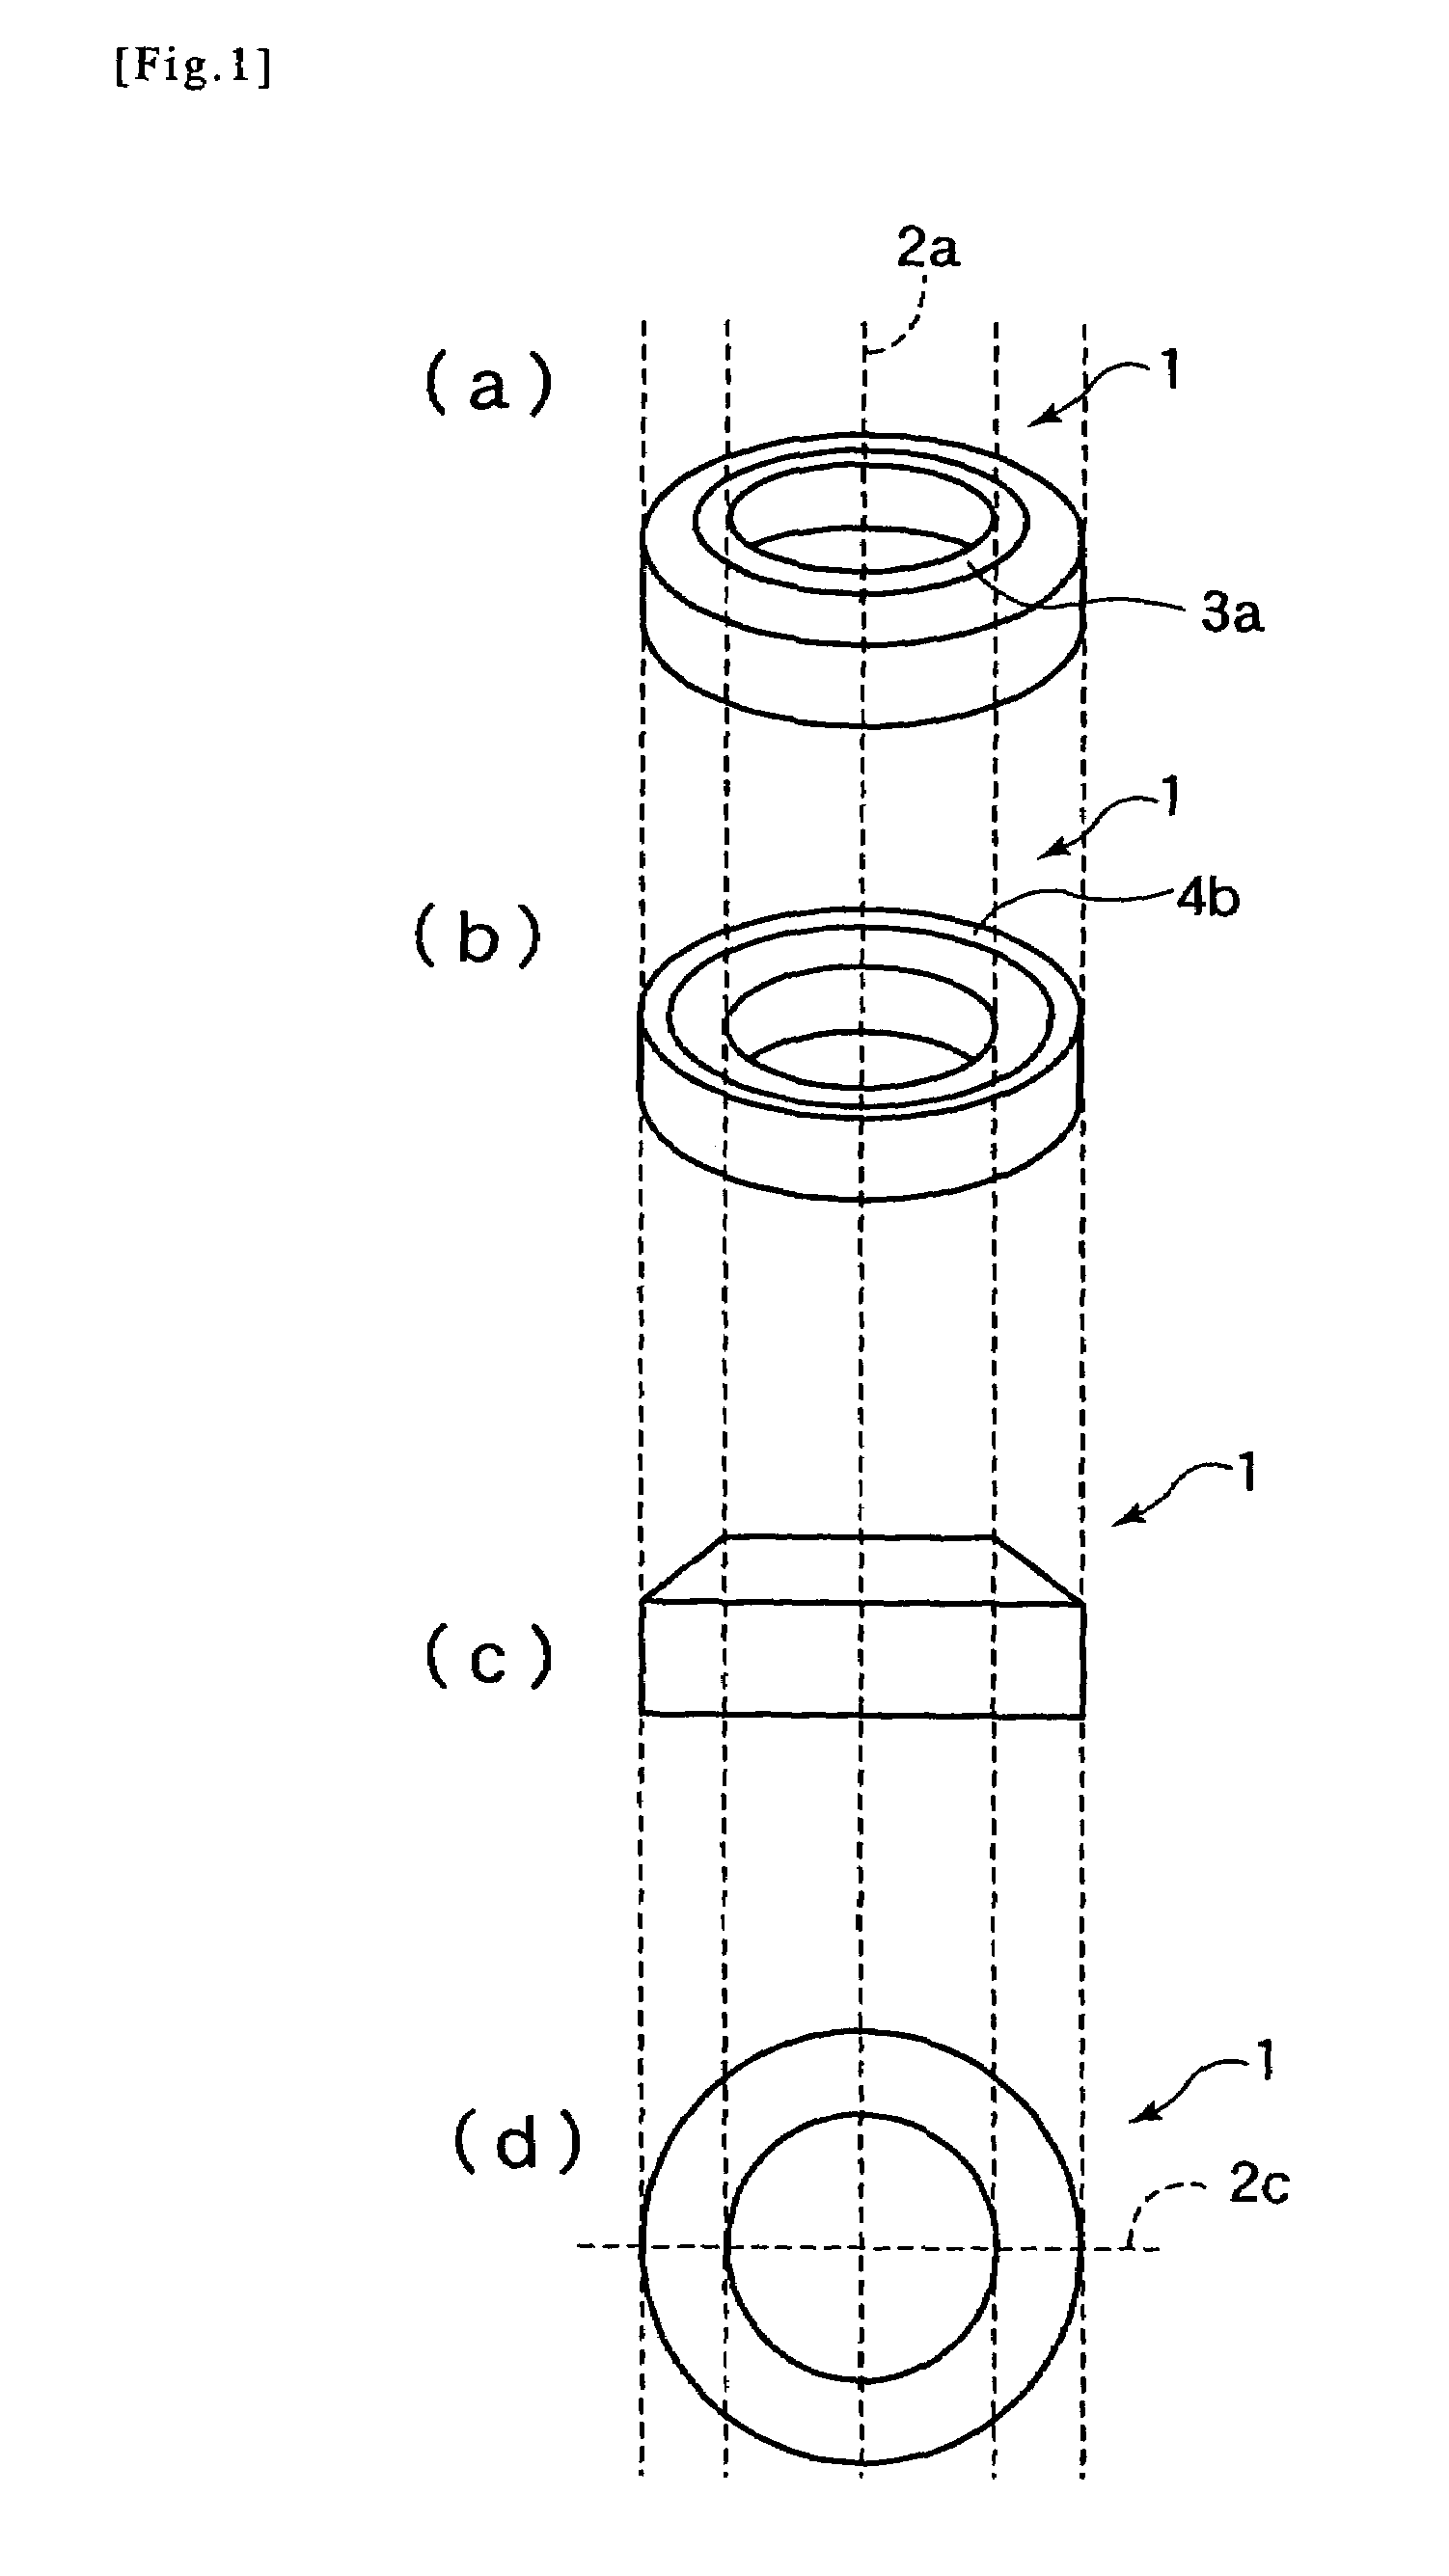 Gland packing and sealing apparatus comprising it